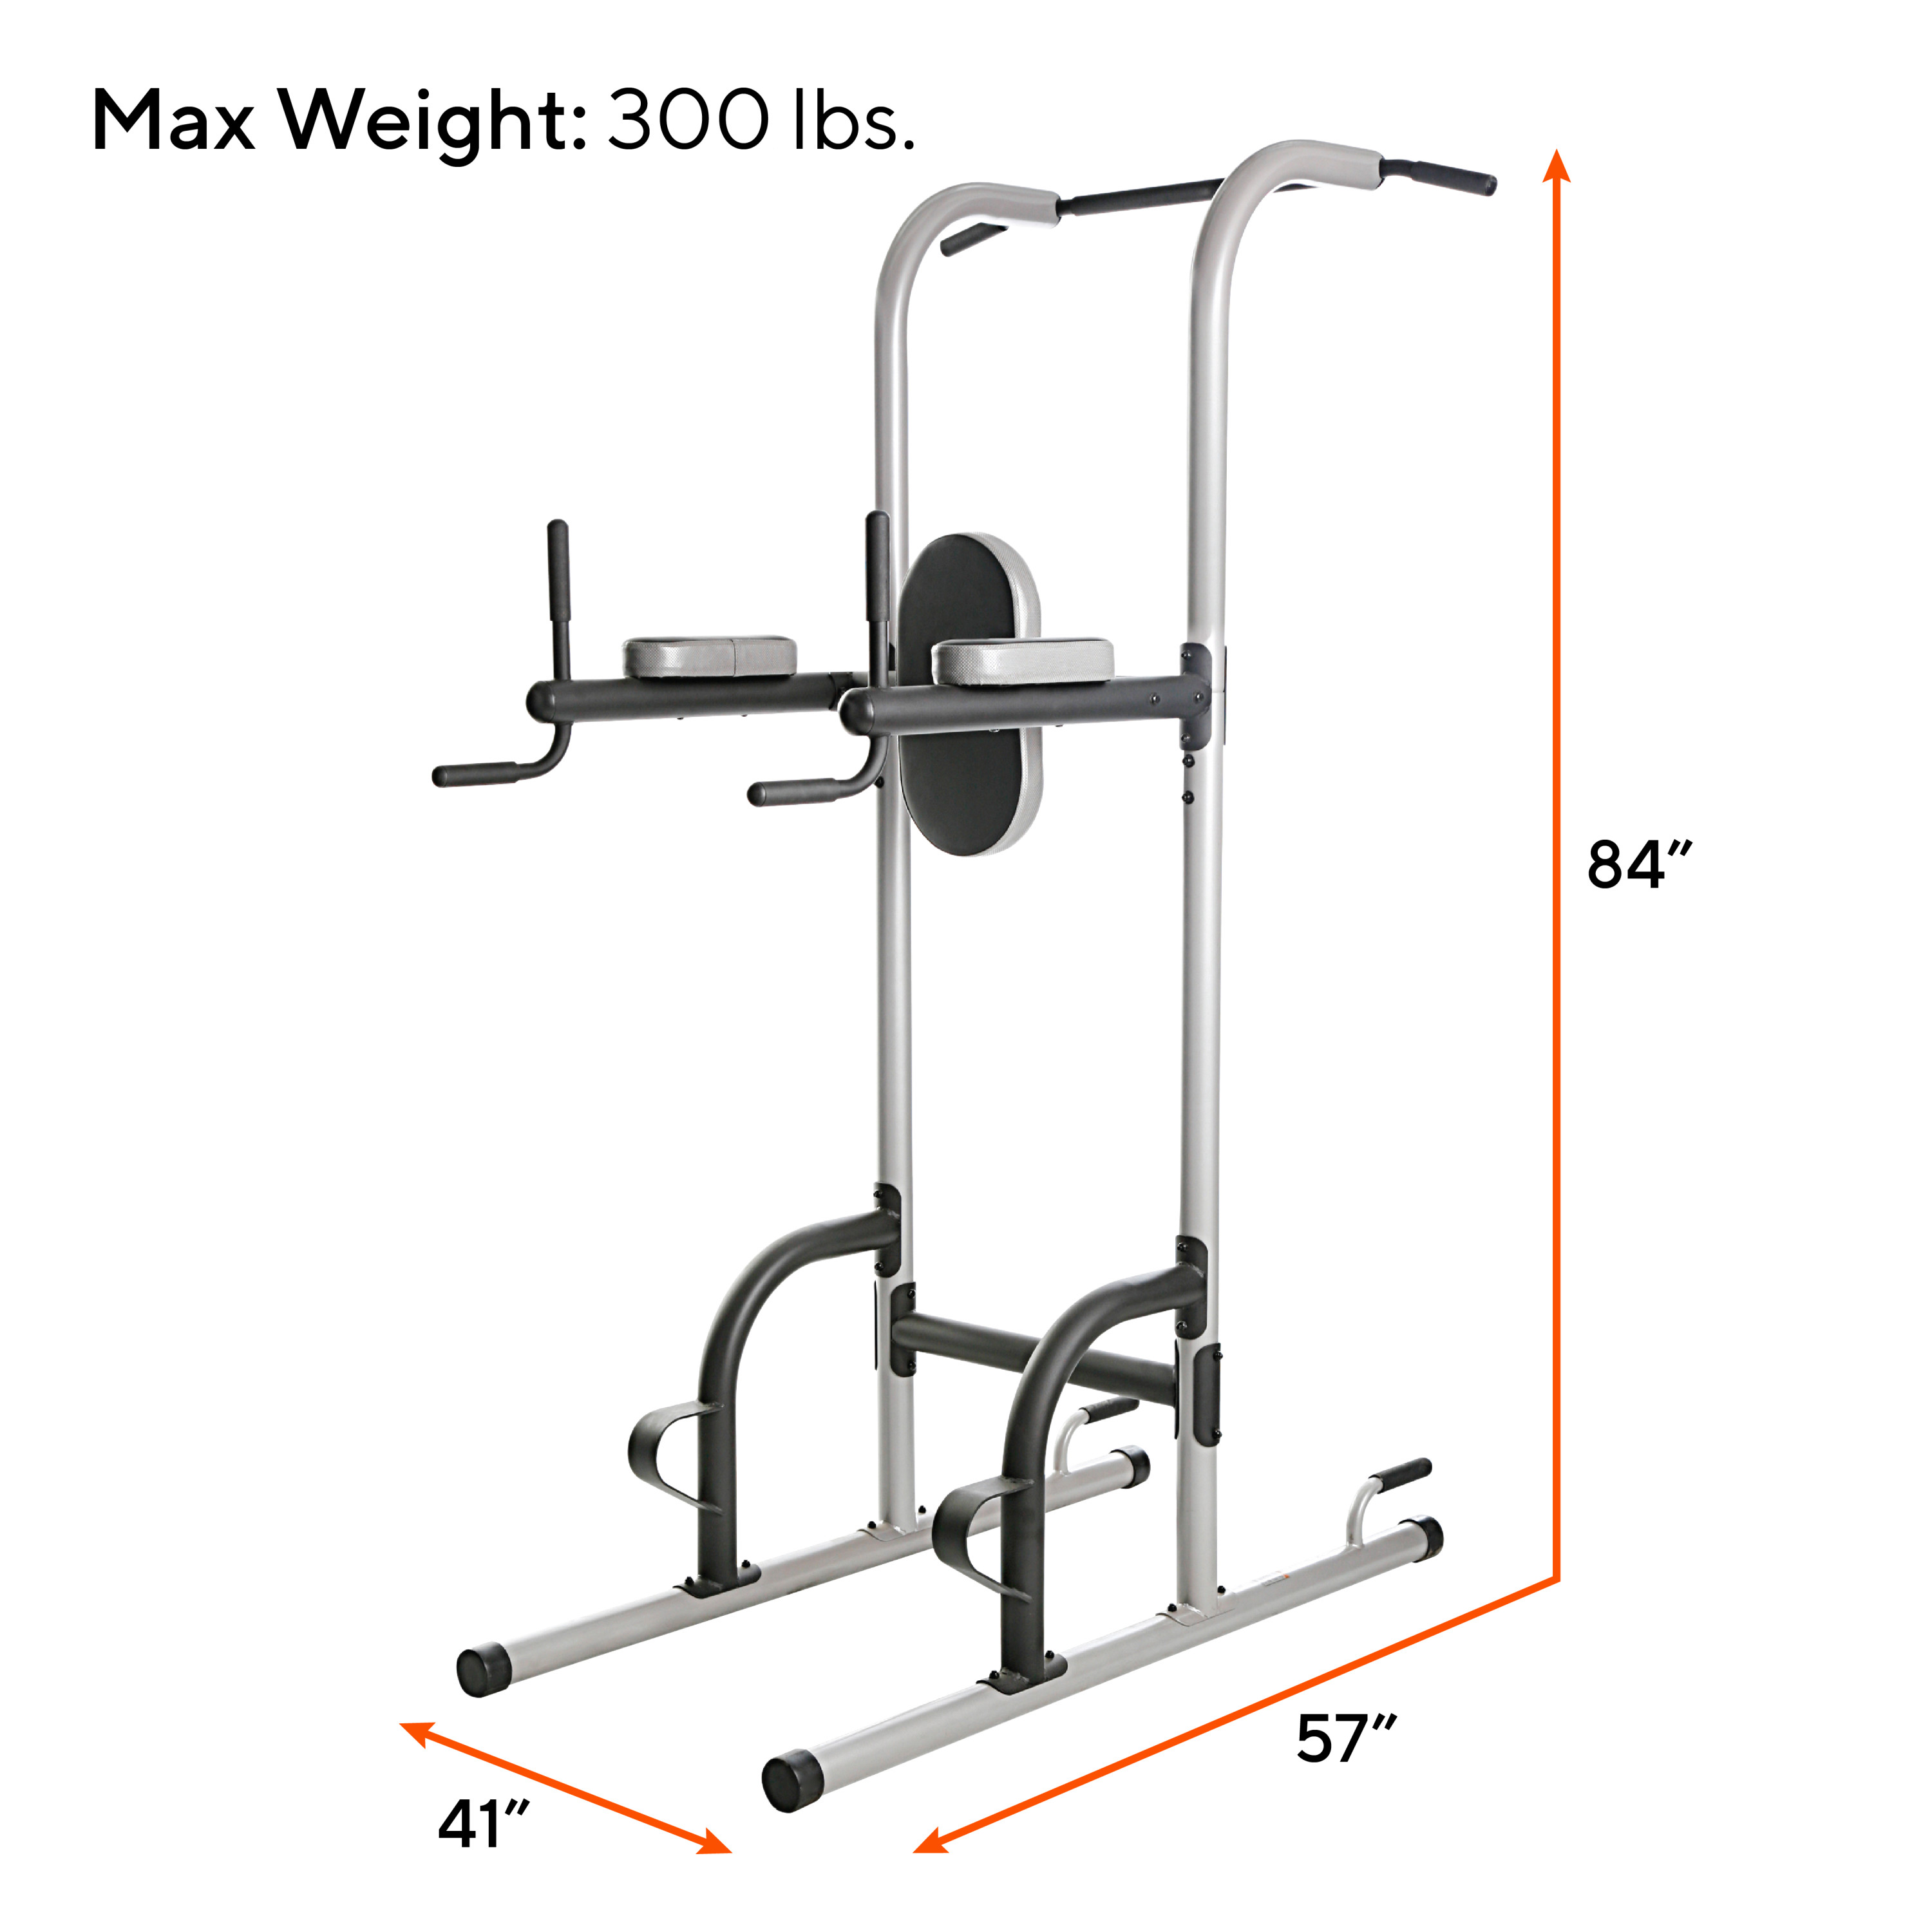 ProForm XR 10.9 Power Tower with Push-Up, Pull-Up & Dip Stations, 300 Lb. Weight Limit - image 2 of 9